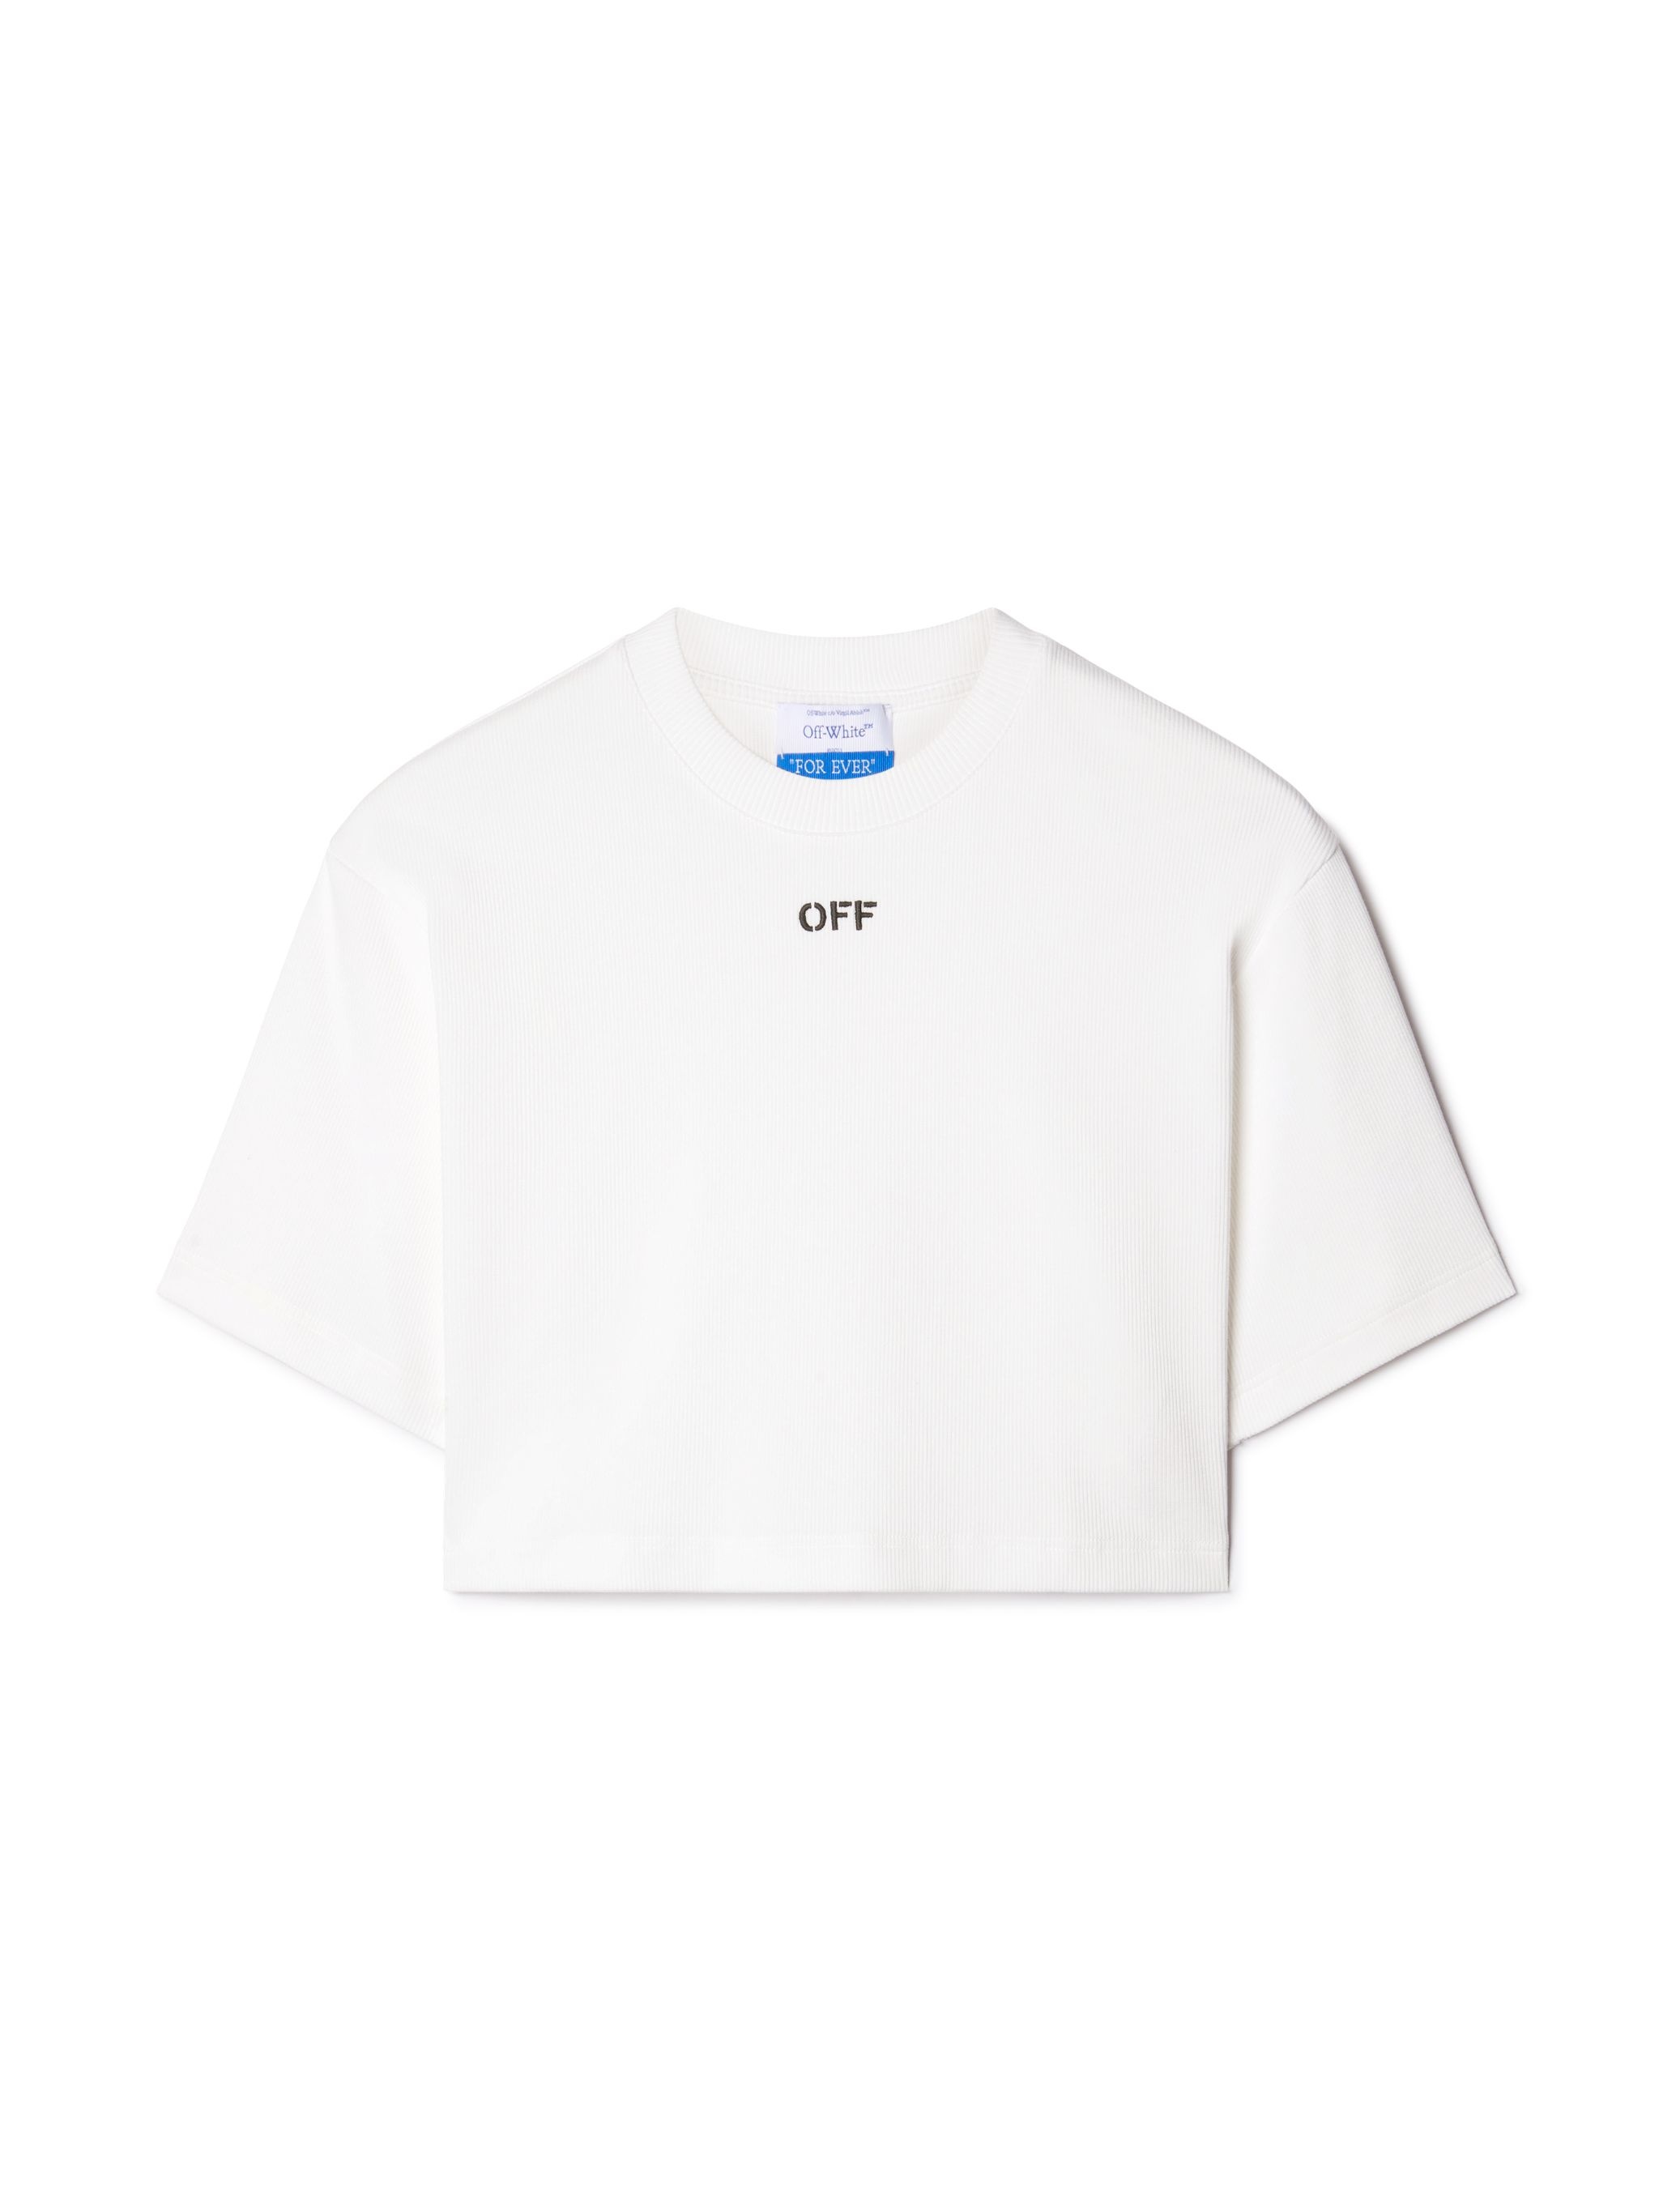 Off Stamp Rib Cropped Tee - 1